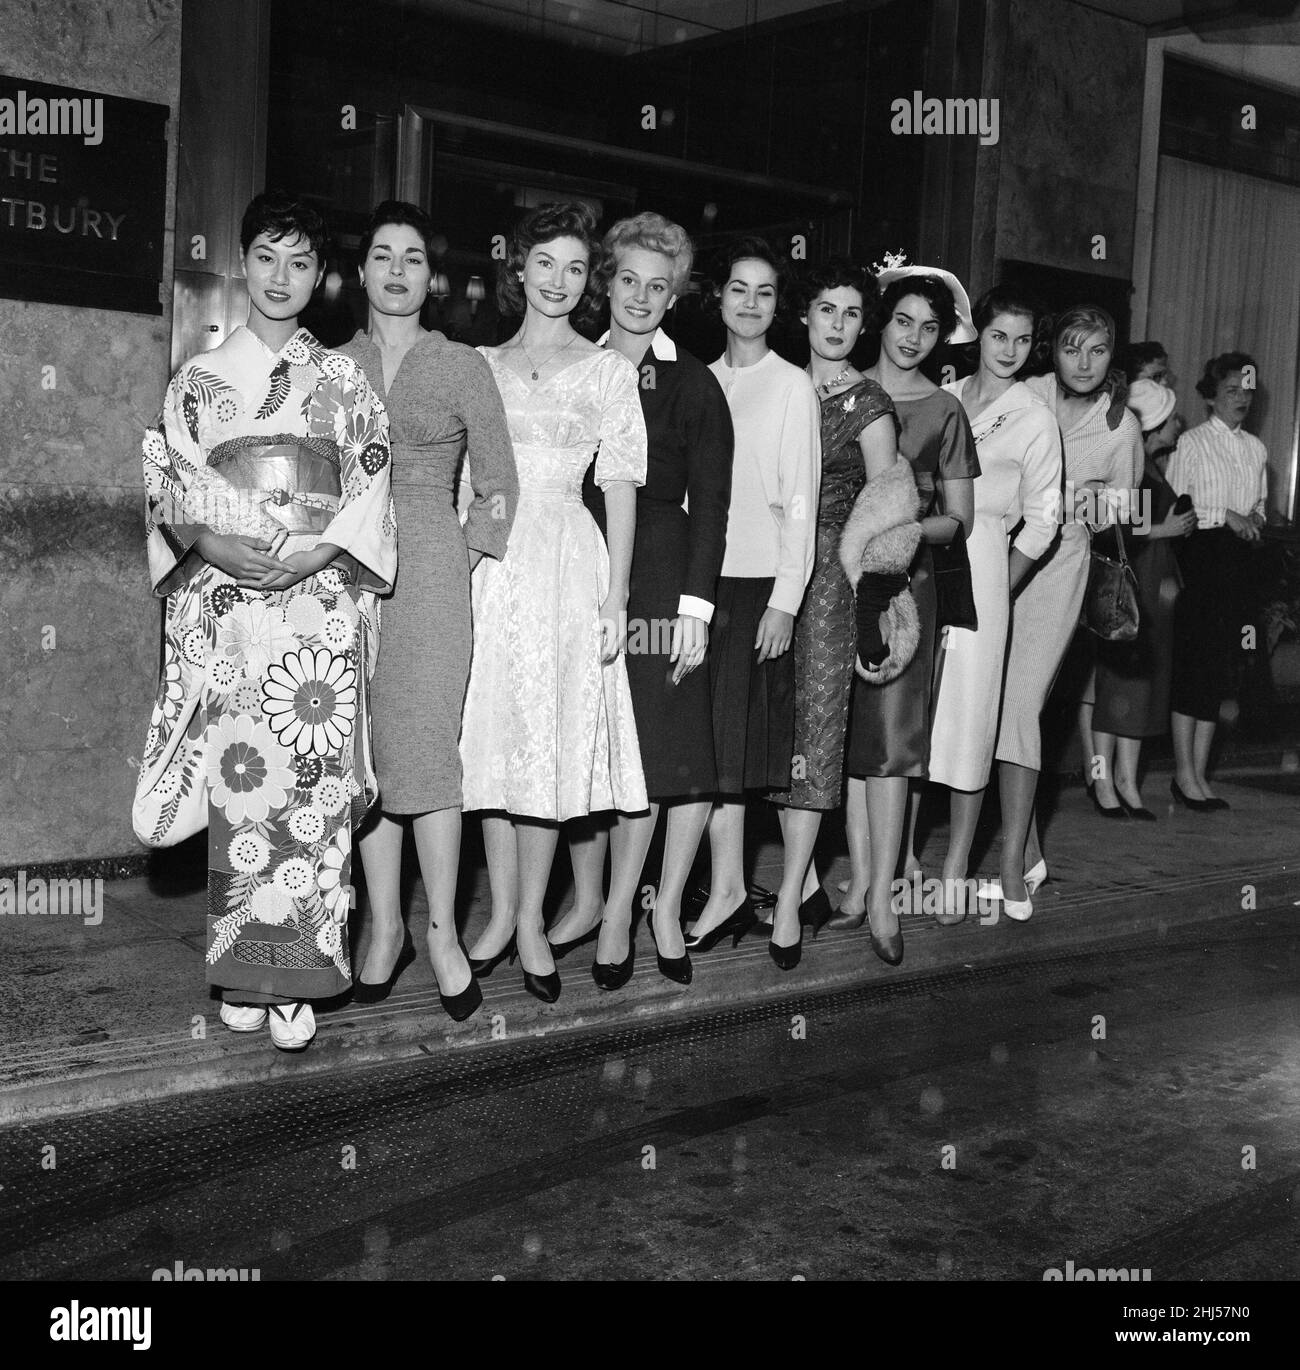 1958 Miss World Beauty Contestants, pictured standing together outside their hotel, The Westbury, London, 5th October 1958. From left to right, Miss Japan Hisako Okuse, Miss United Kingdom Eileen Elizabeth Sheridan, Miss USA Nancy Anne Corcoran, Miss Holland Lucienne Struve, Miss France Claudine Oger, Miss Canada Marilyn Anne Keddie, Miss Brazil Sonia Maria Campos, Miss South Africa Penelope Anne Coelen and Miss Italy Elisabetta Velinsky. Stock Photo